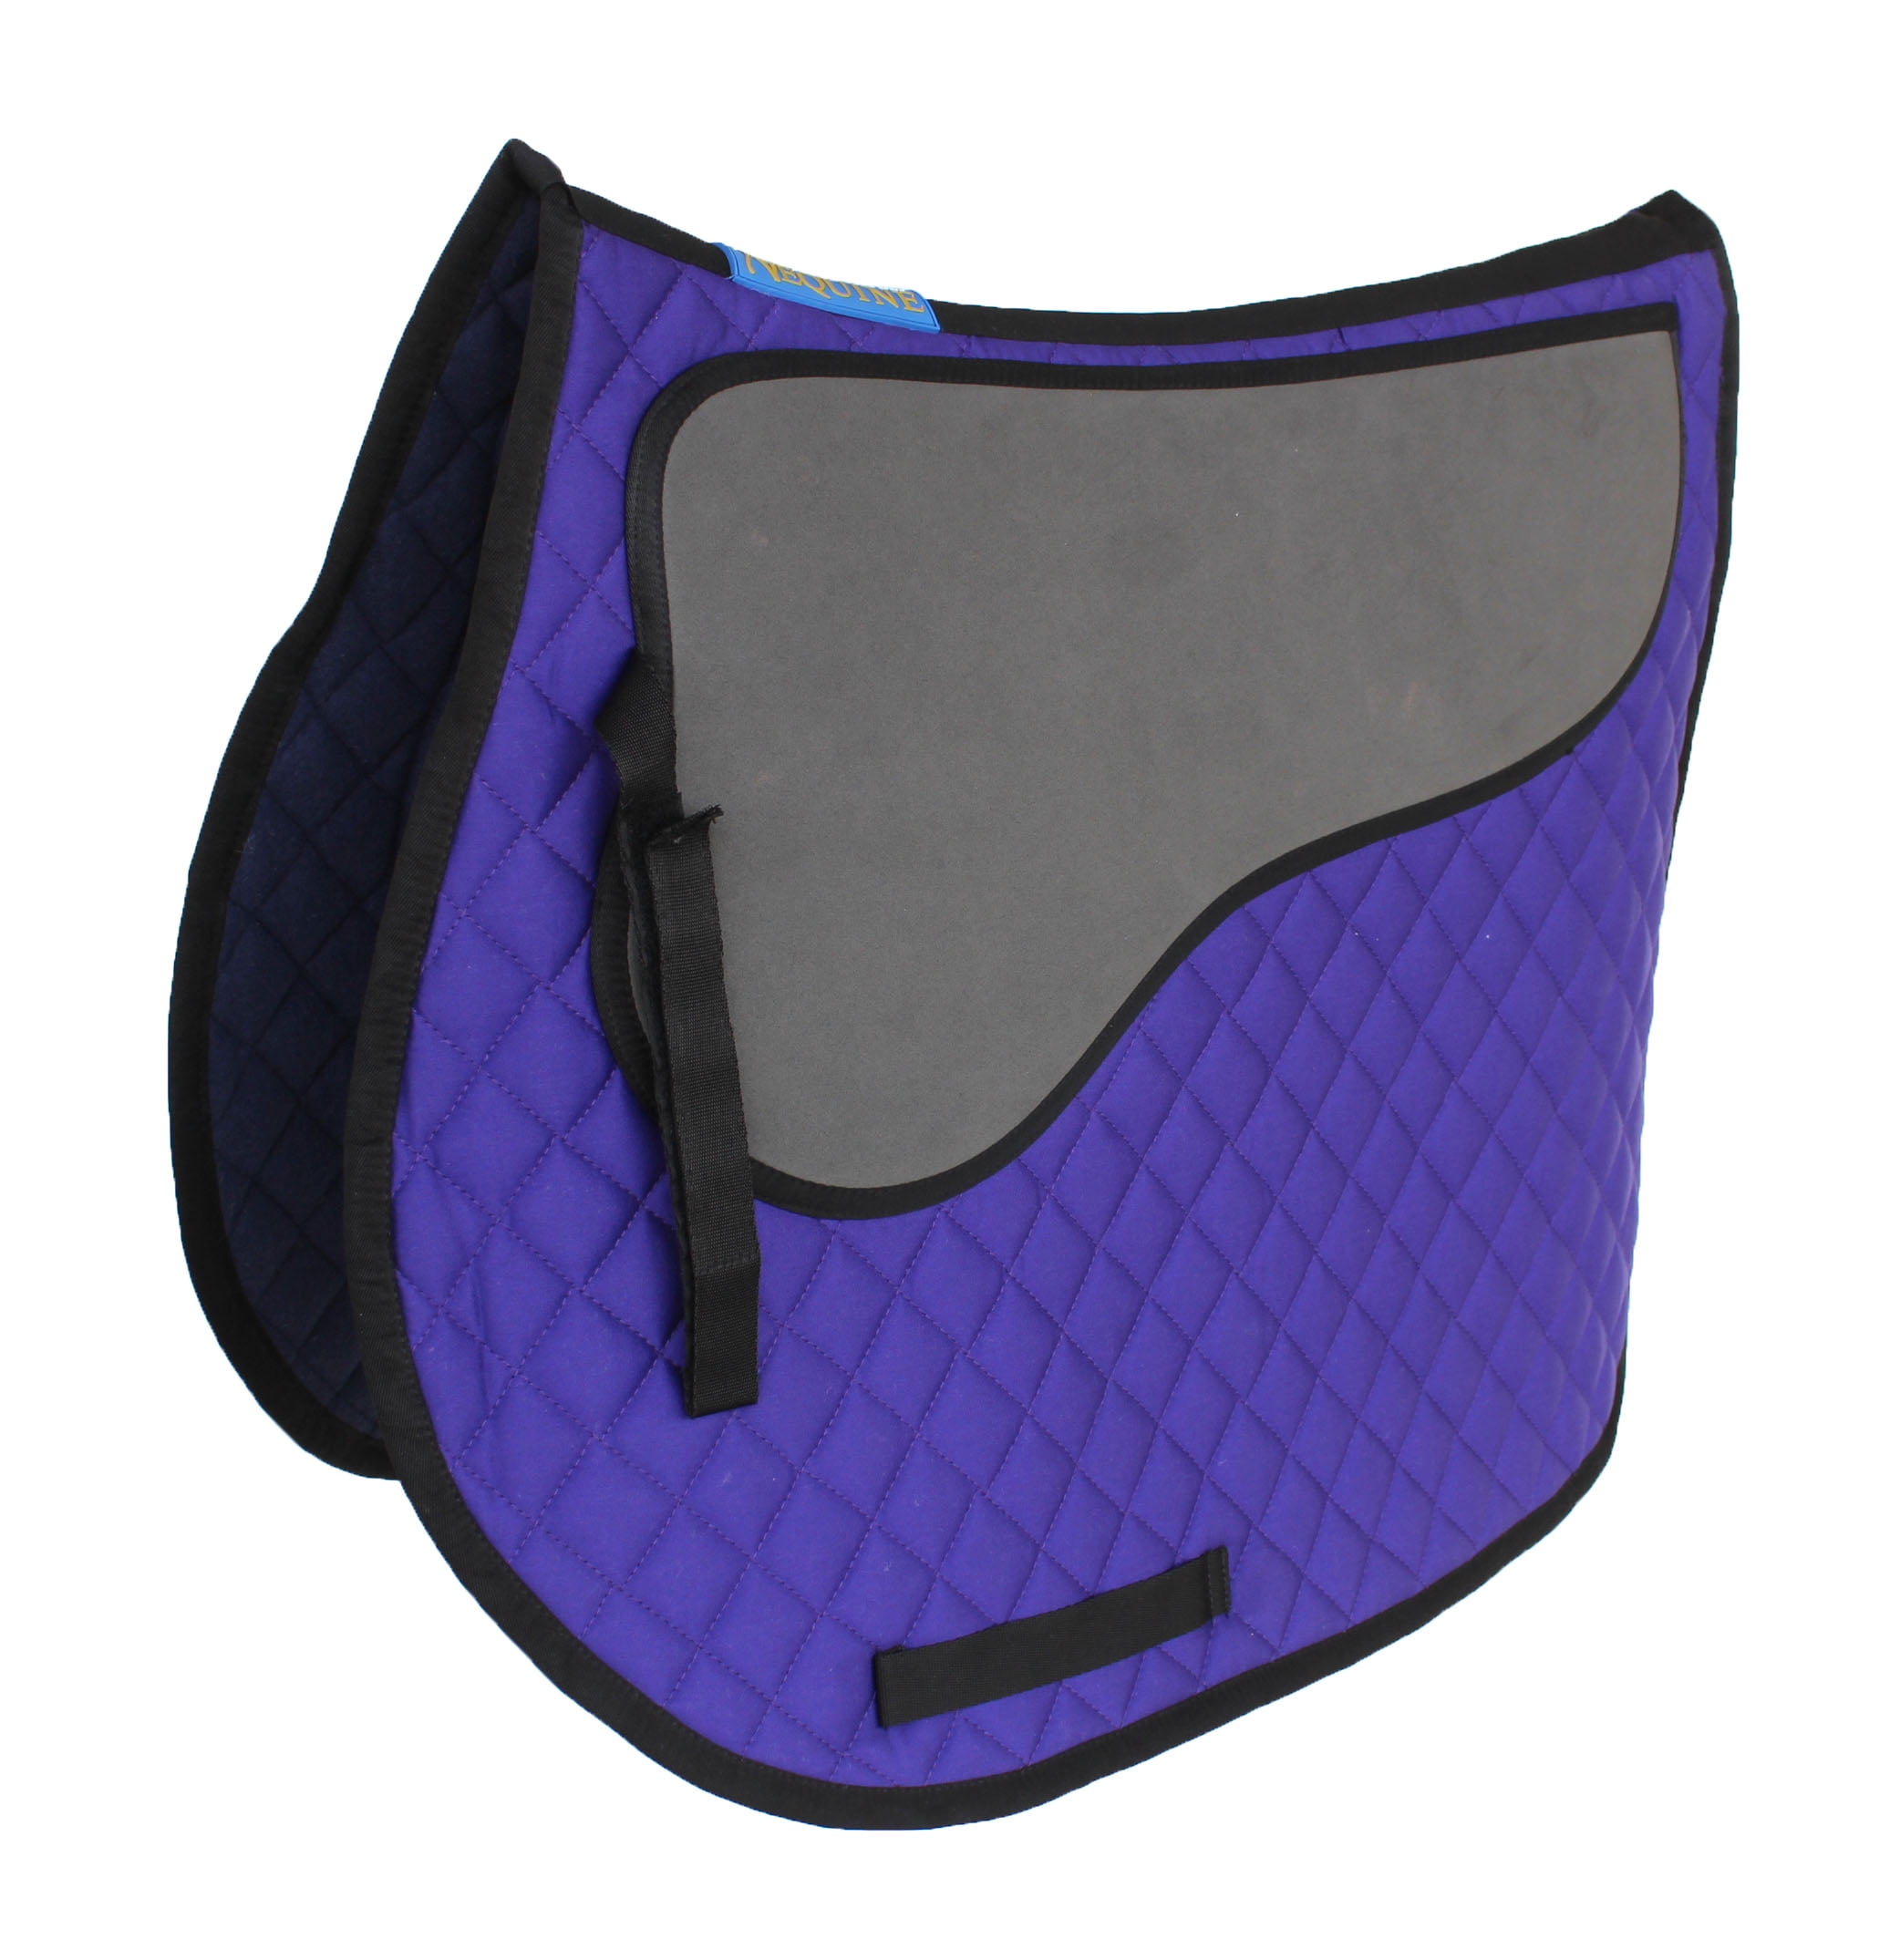 Horse Saddle Pad English Quilted All-Purpose Shock Absorbing Gel 72TS21 